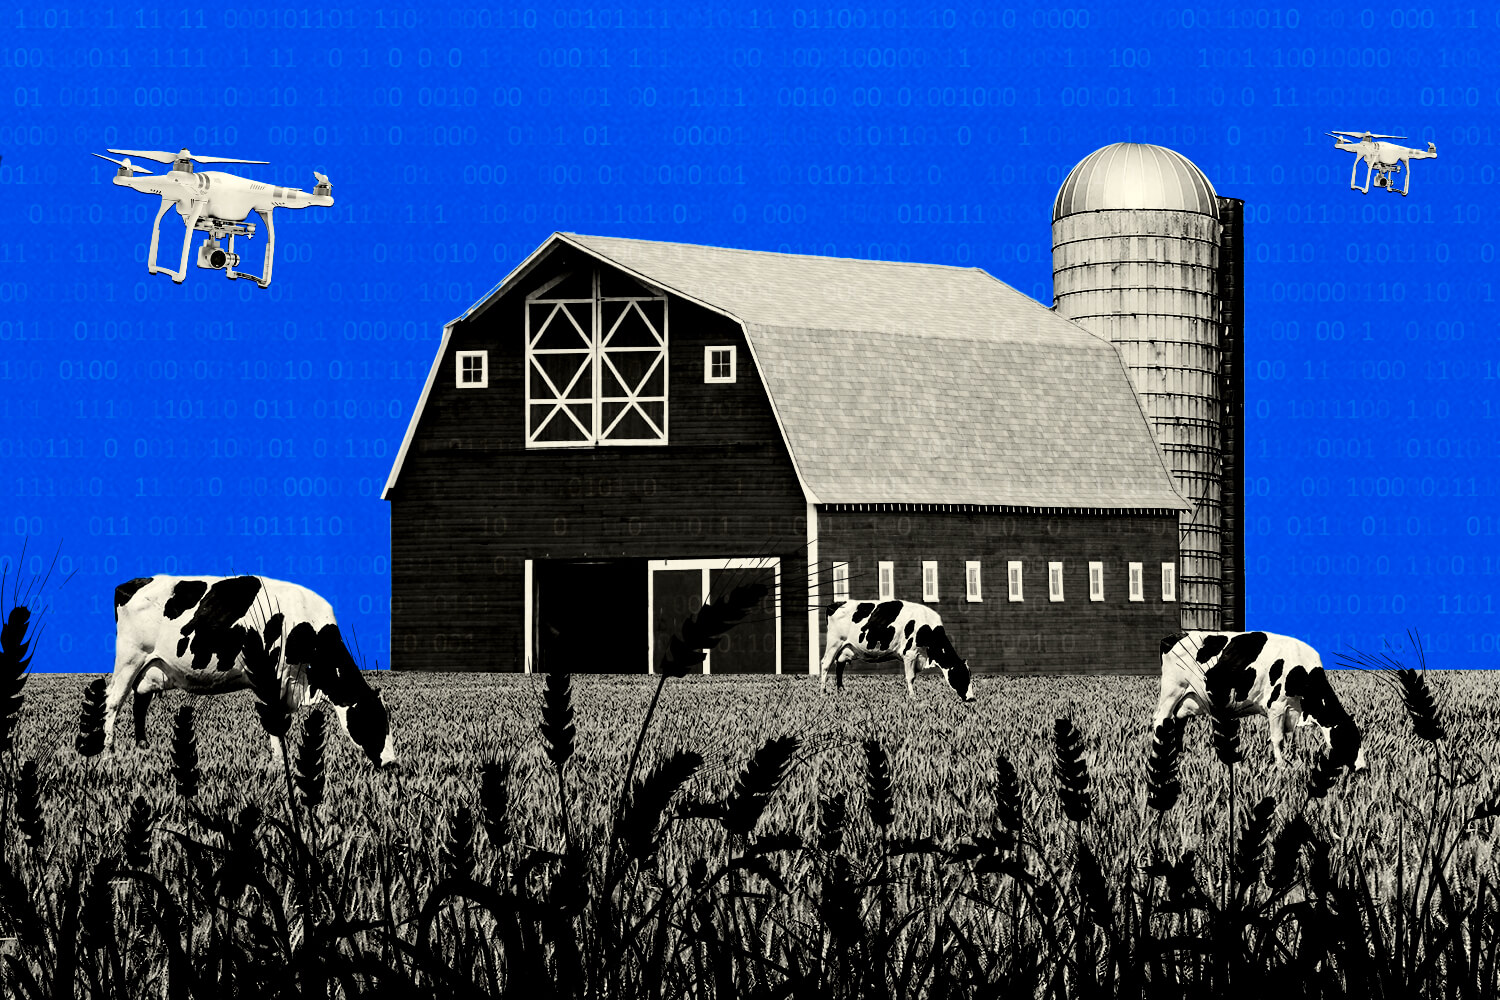 A barn and cows in a field with two drones hovering overhead and a blue sky.